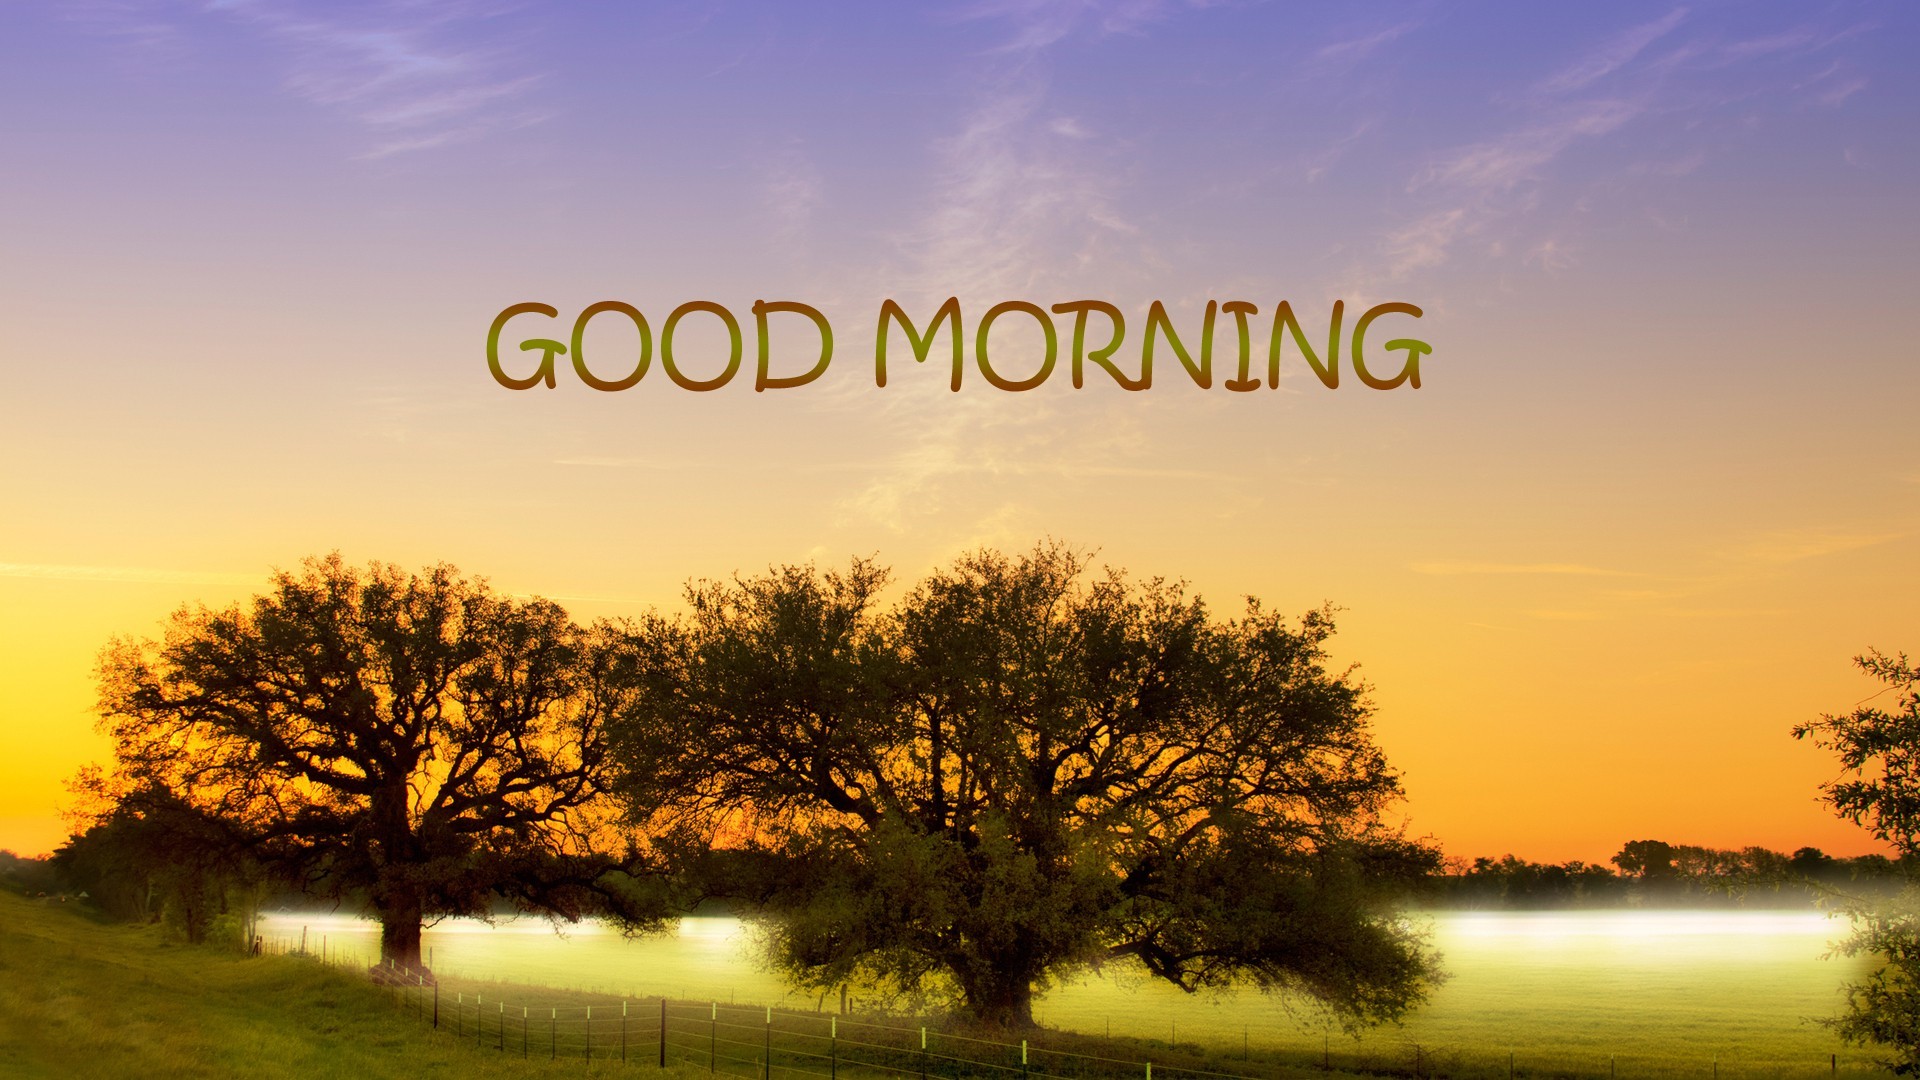 1920x1080 Good Morning HD Wallpaper Pictures Hd Wallpapers 